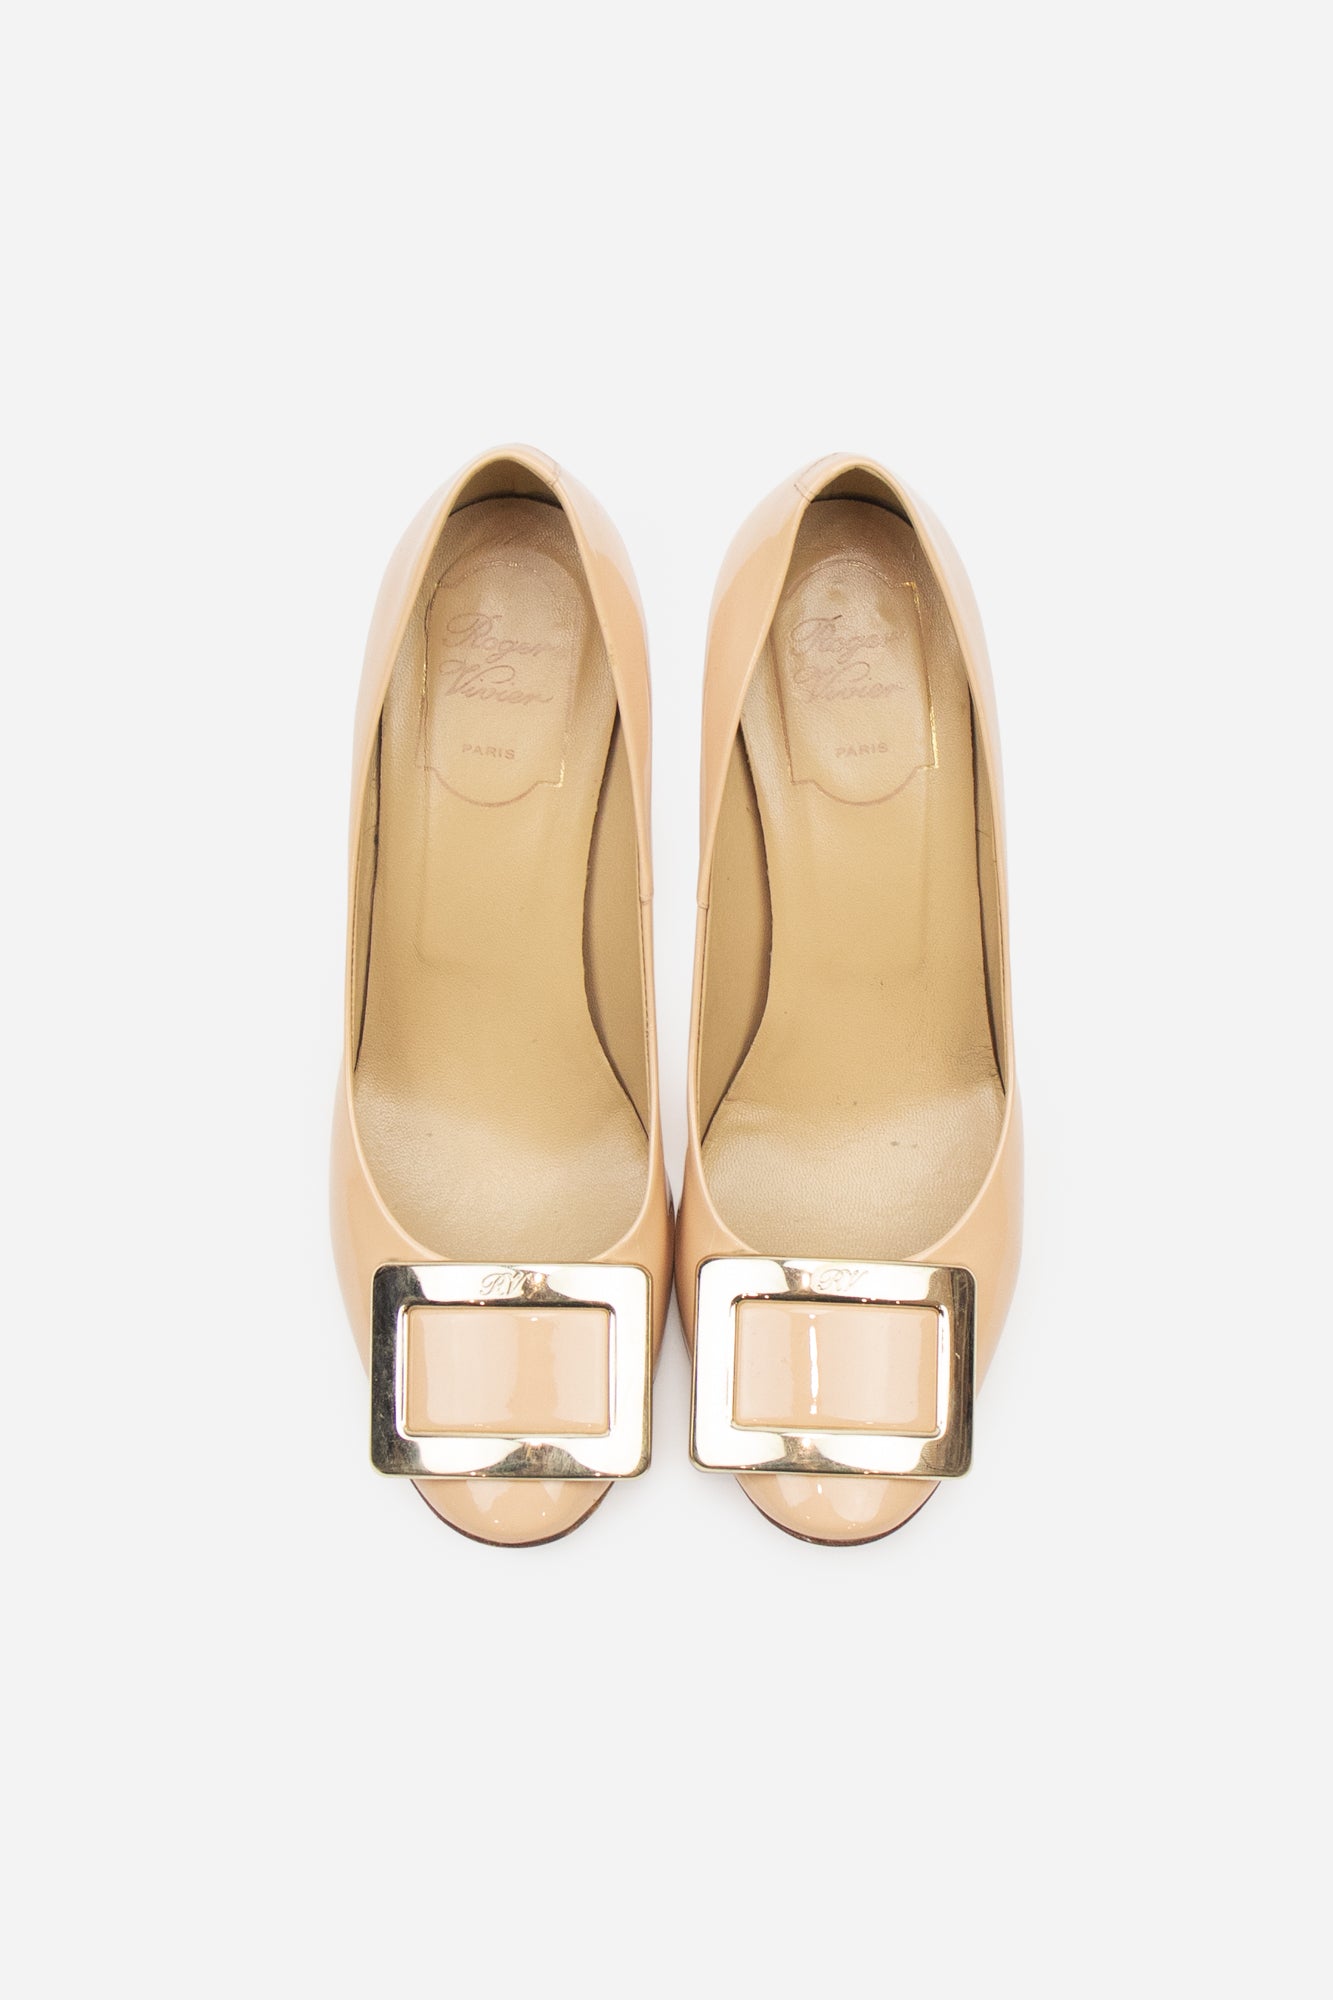 Nude Patent Leather Classic Pumps - So Over It Luxury Consignment